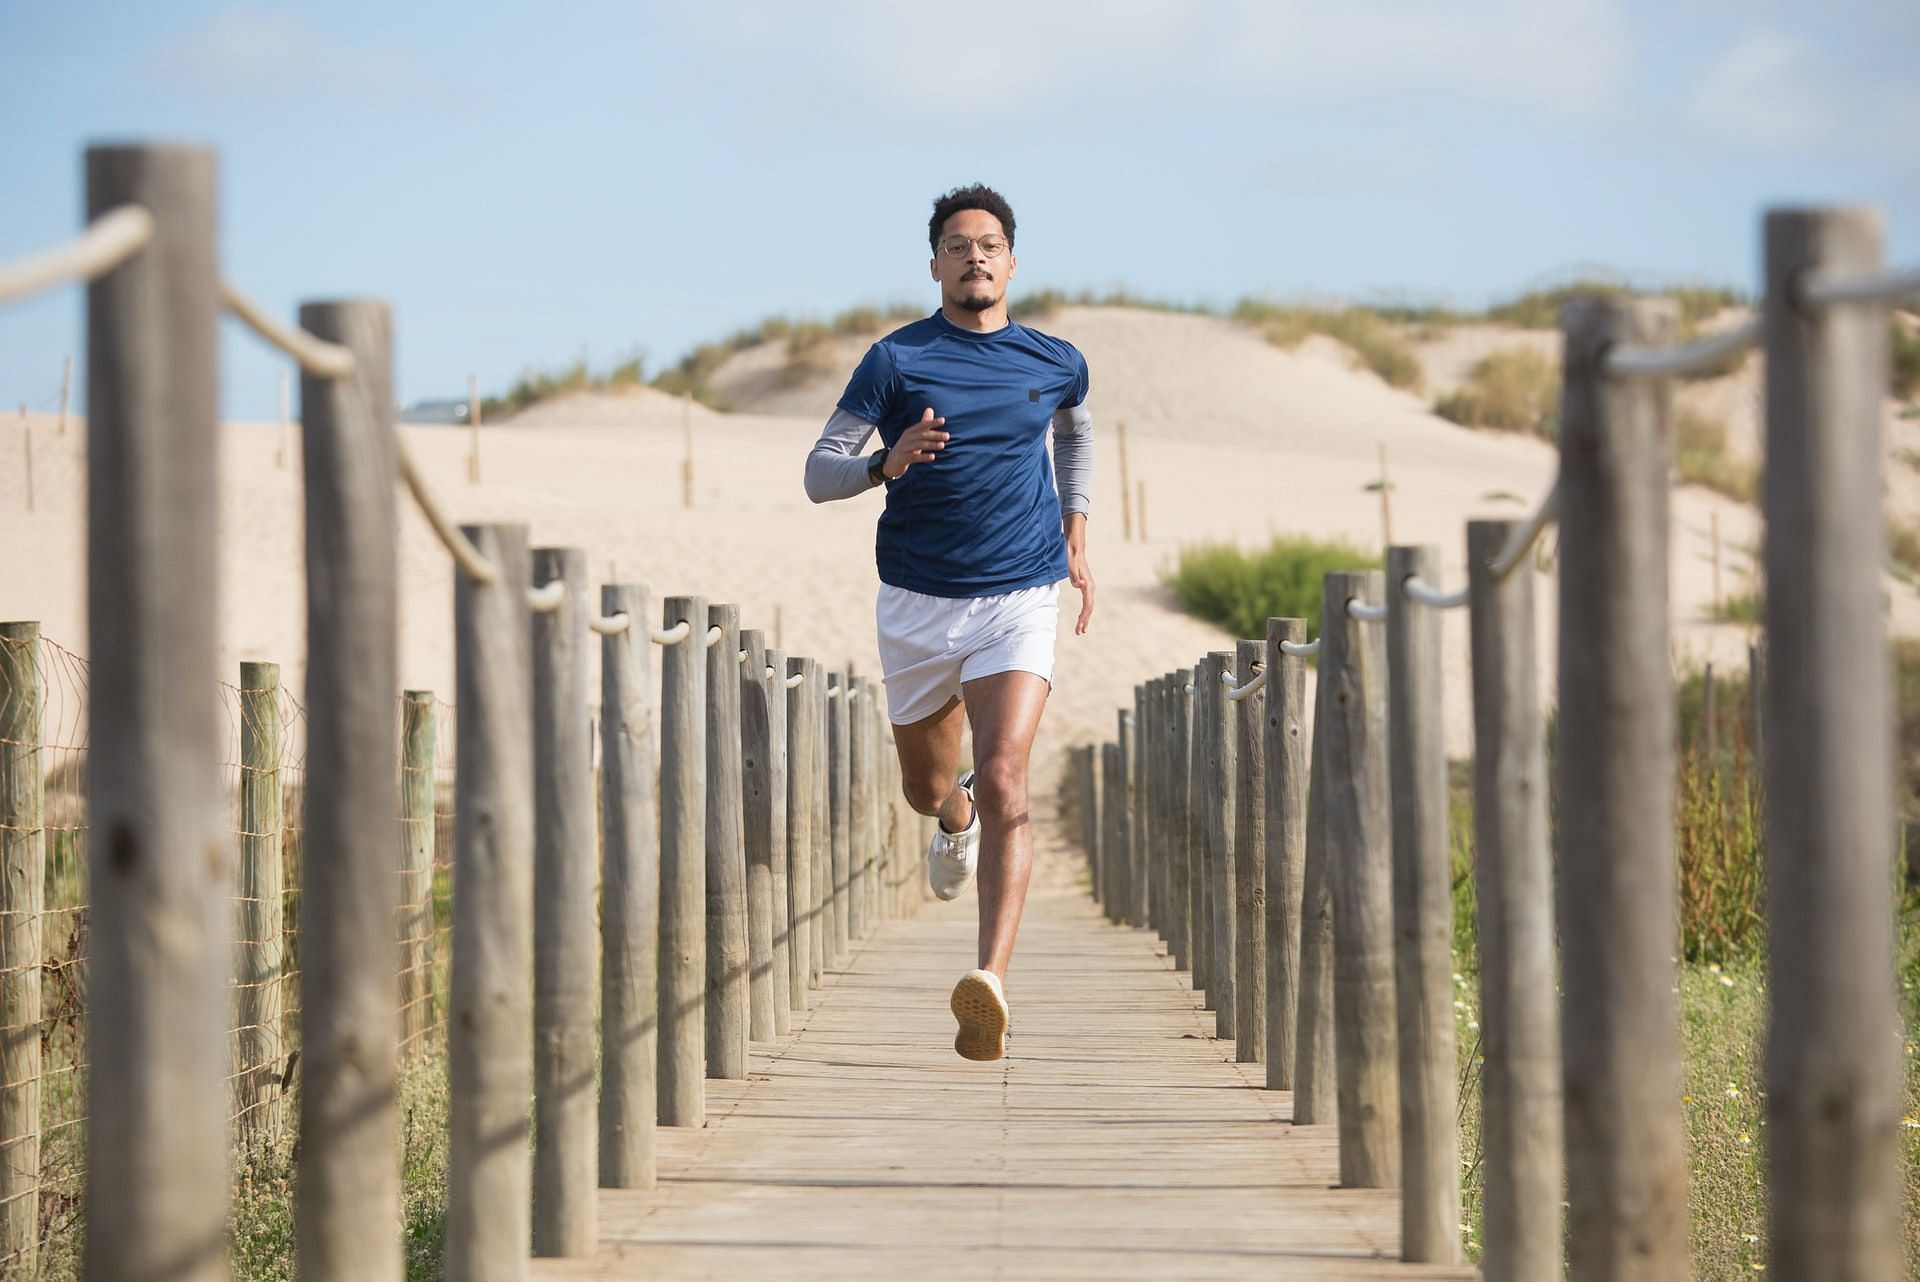 Jogging and running are effective forms of cardio exercise. (Photo by Kampus Production via pexels)